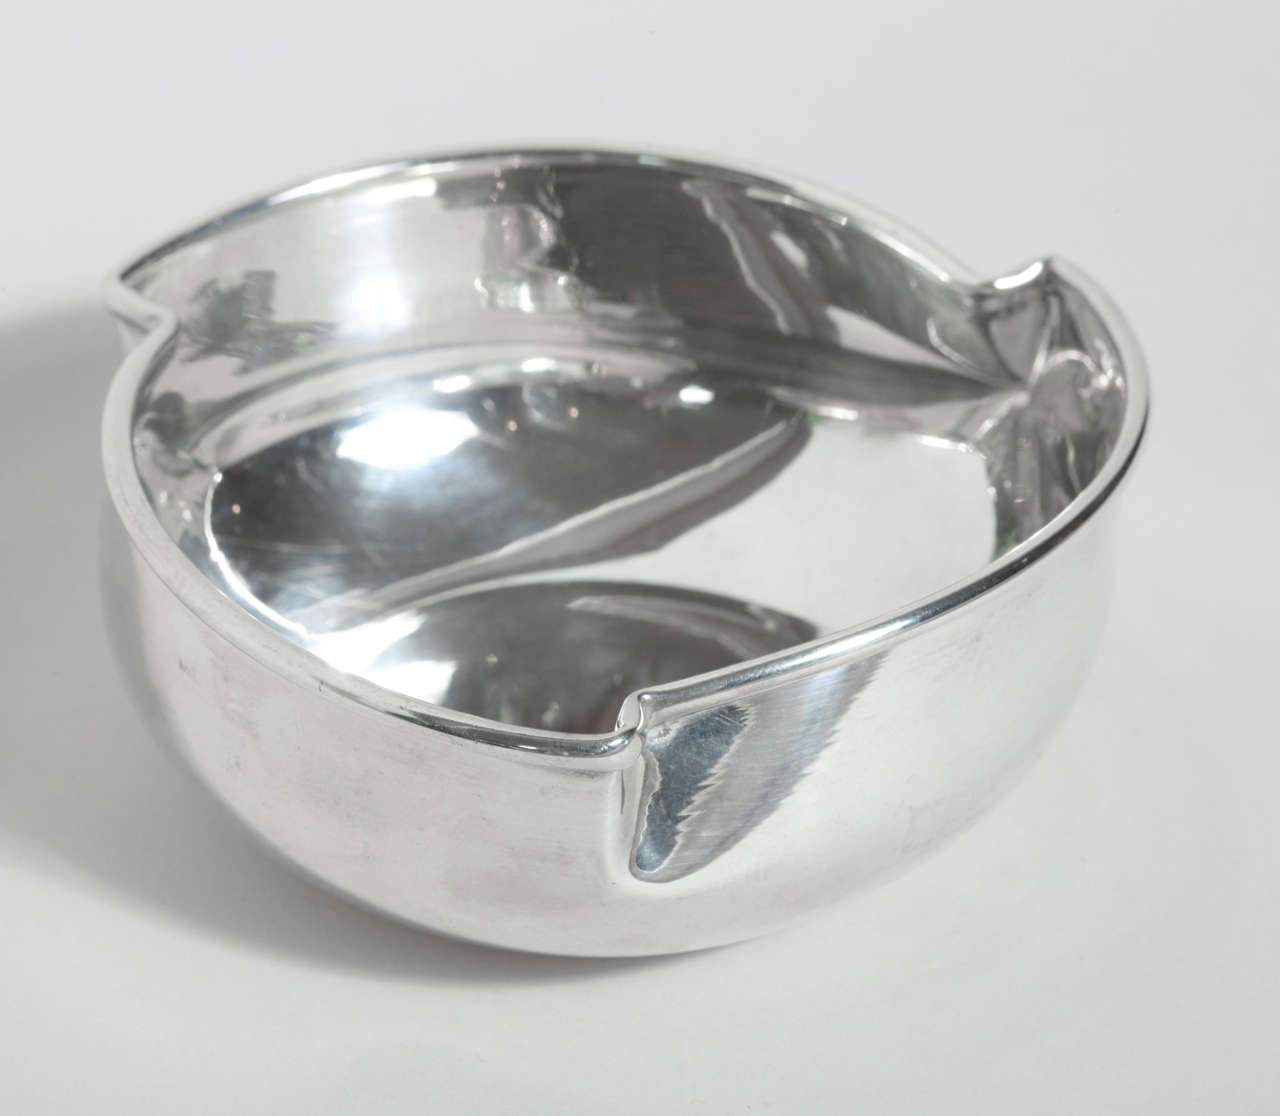 Circular sterling silver coupe with three folds around the upper lip.
Hallmarks: 925 silver/ probable Norwegian poincon

3.65 ozs

(Price shown is reduced price, no further trade discount) 